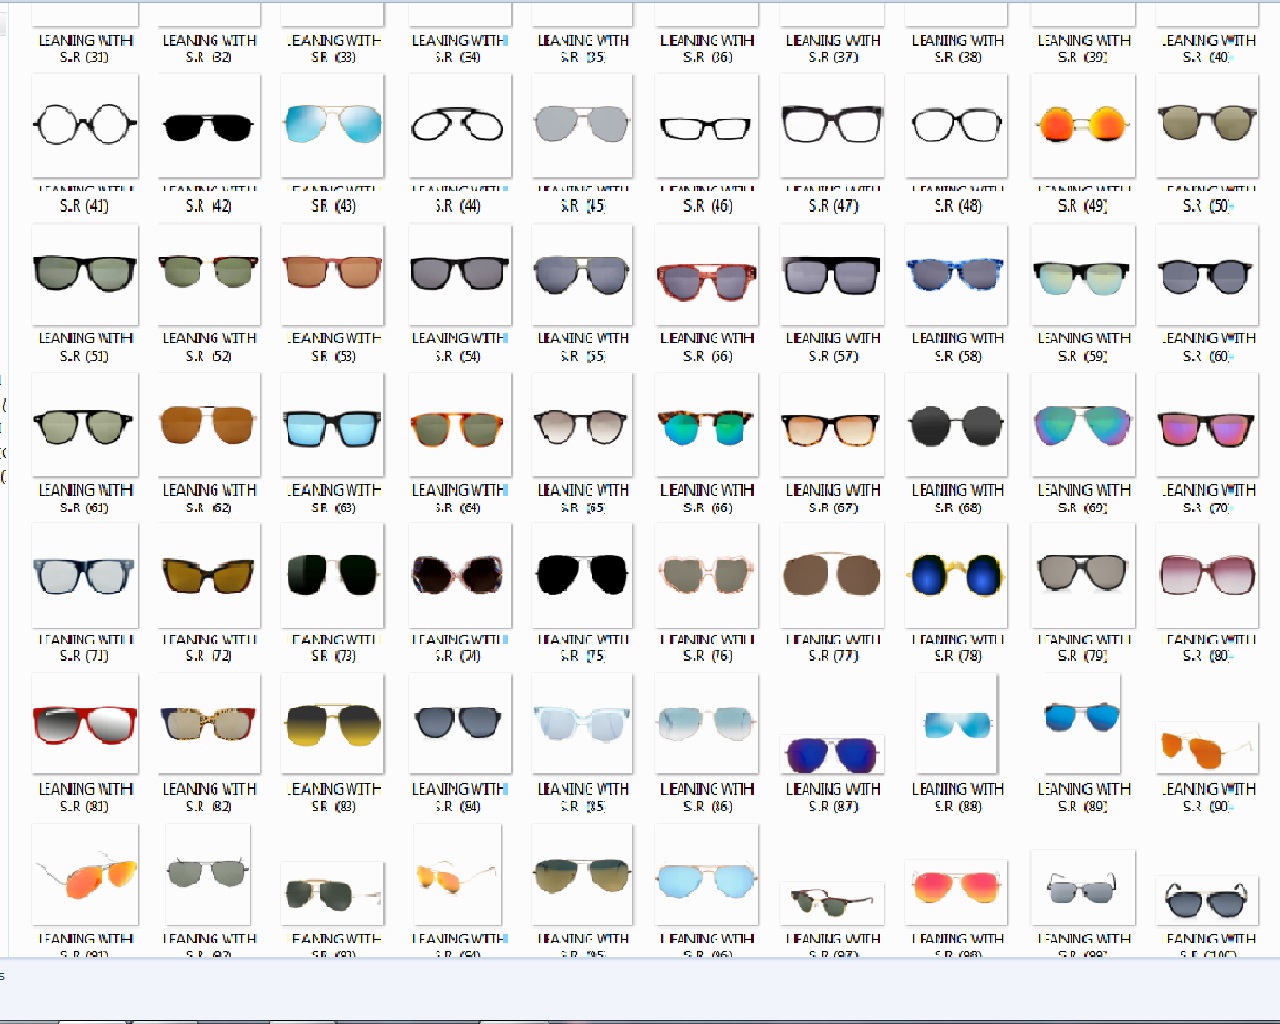 200 Sunglass PNG Stock Zip File LEARNING WITH SR